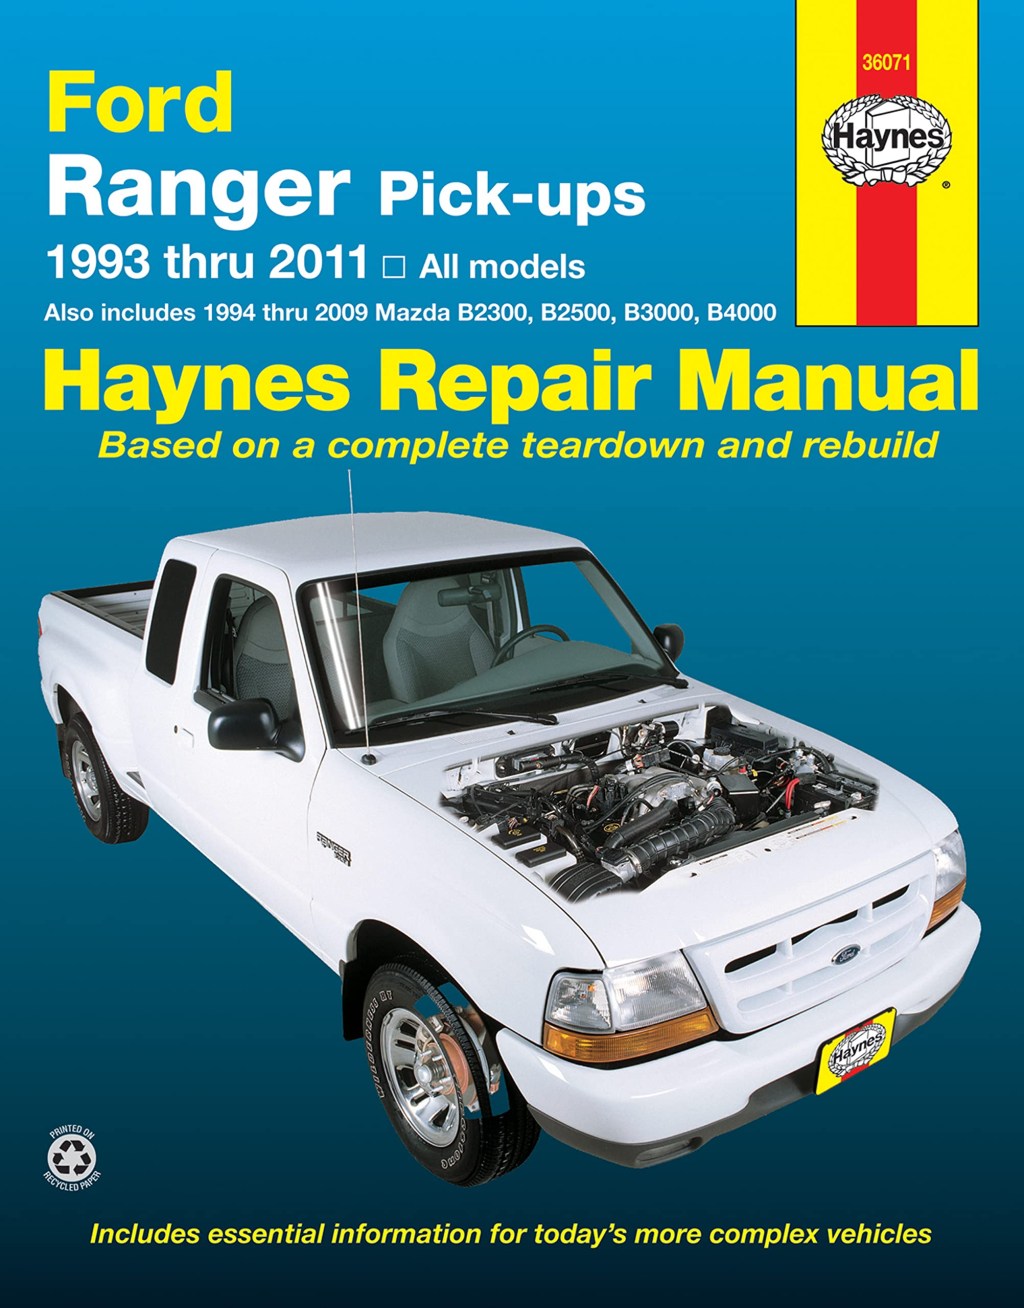 Picture of: Manual – Ford Ranger P/U Mazdz B Series (-), Throttle